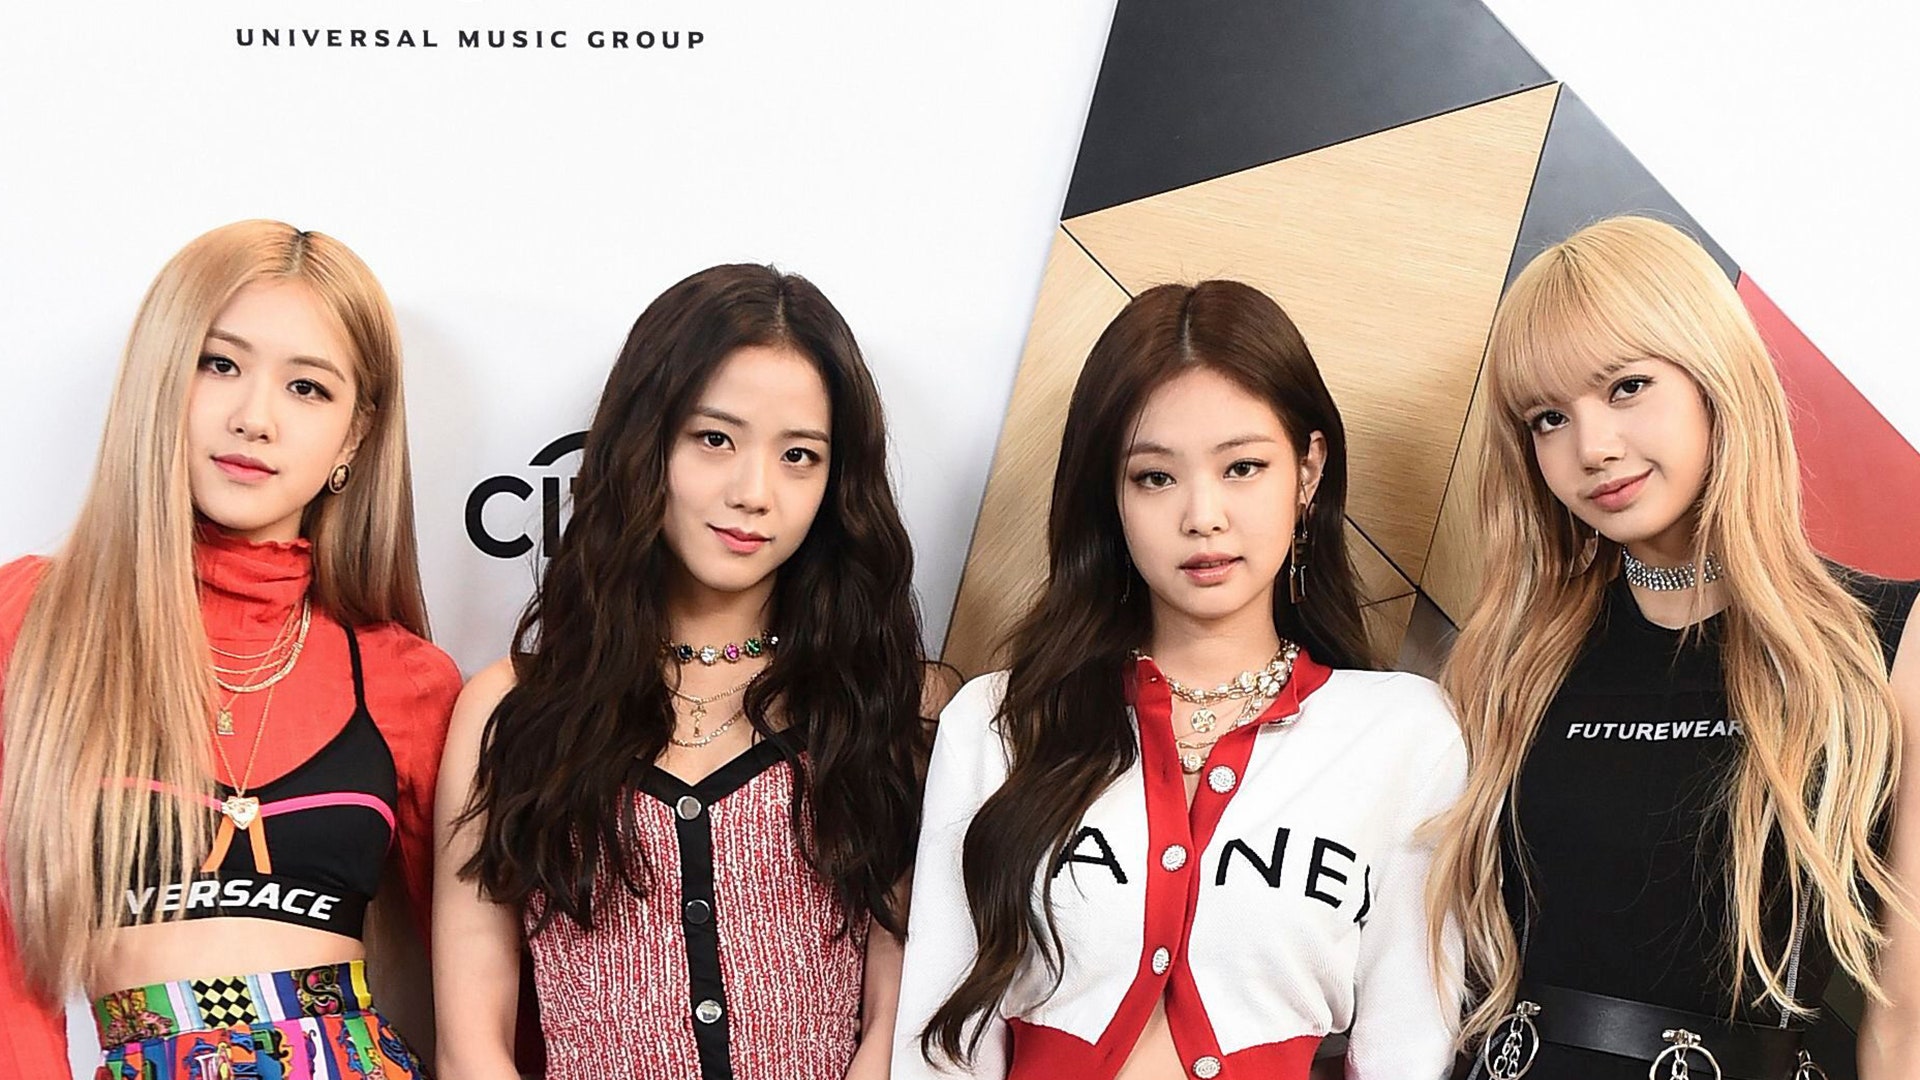 Blackpink Coachella - Your guide to the huge Korean girl band